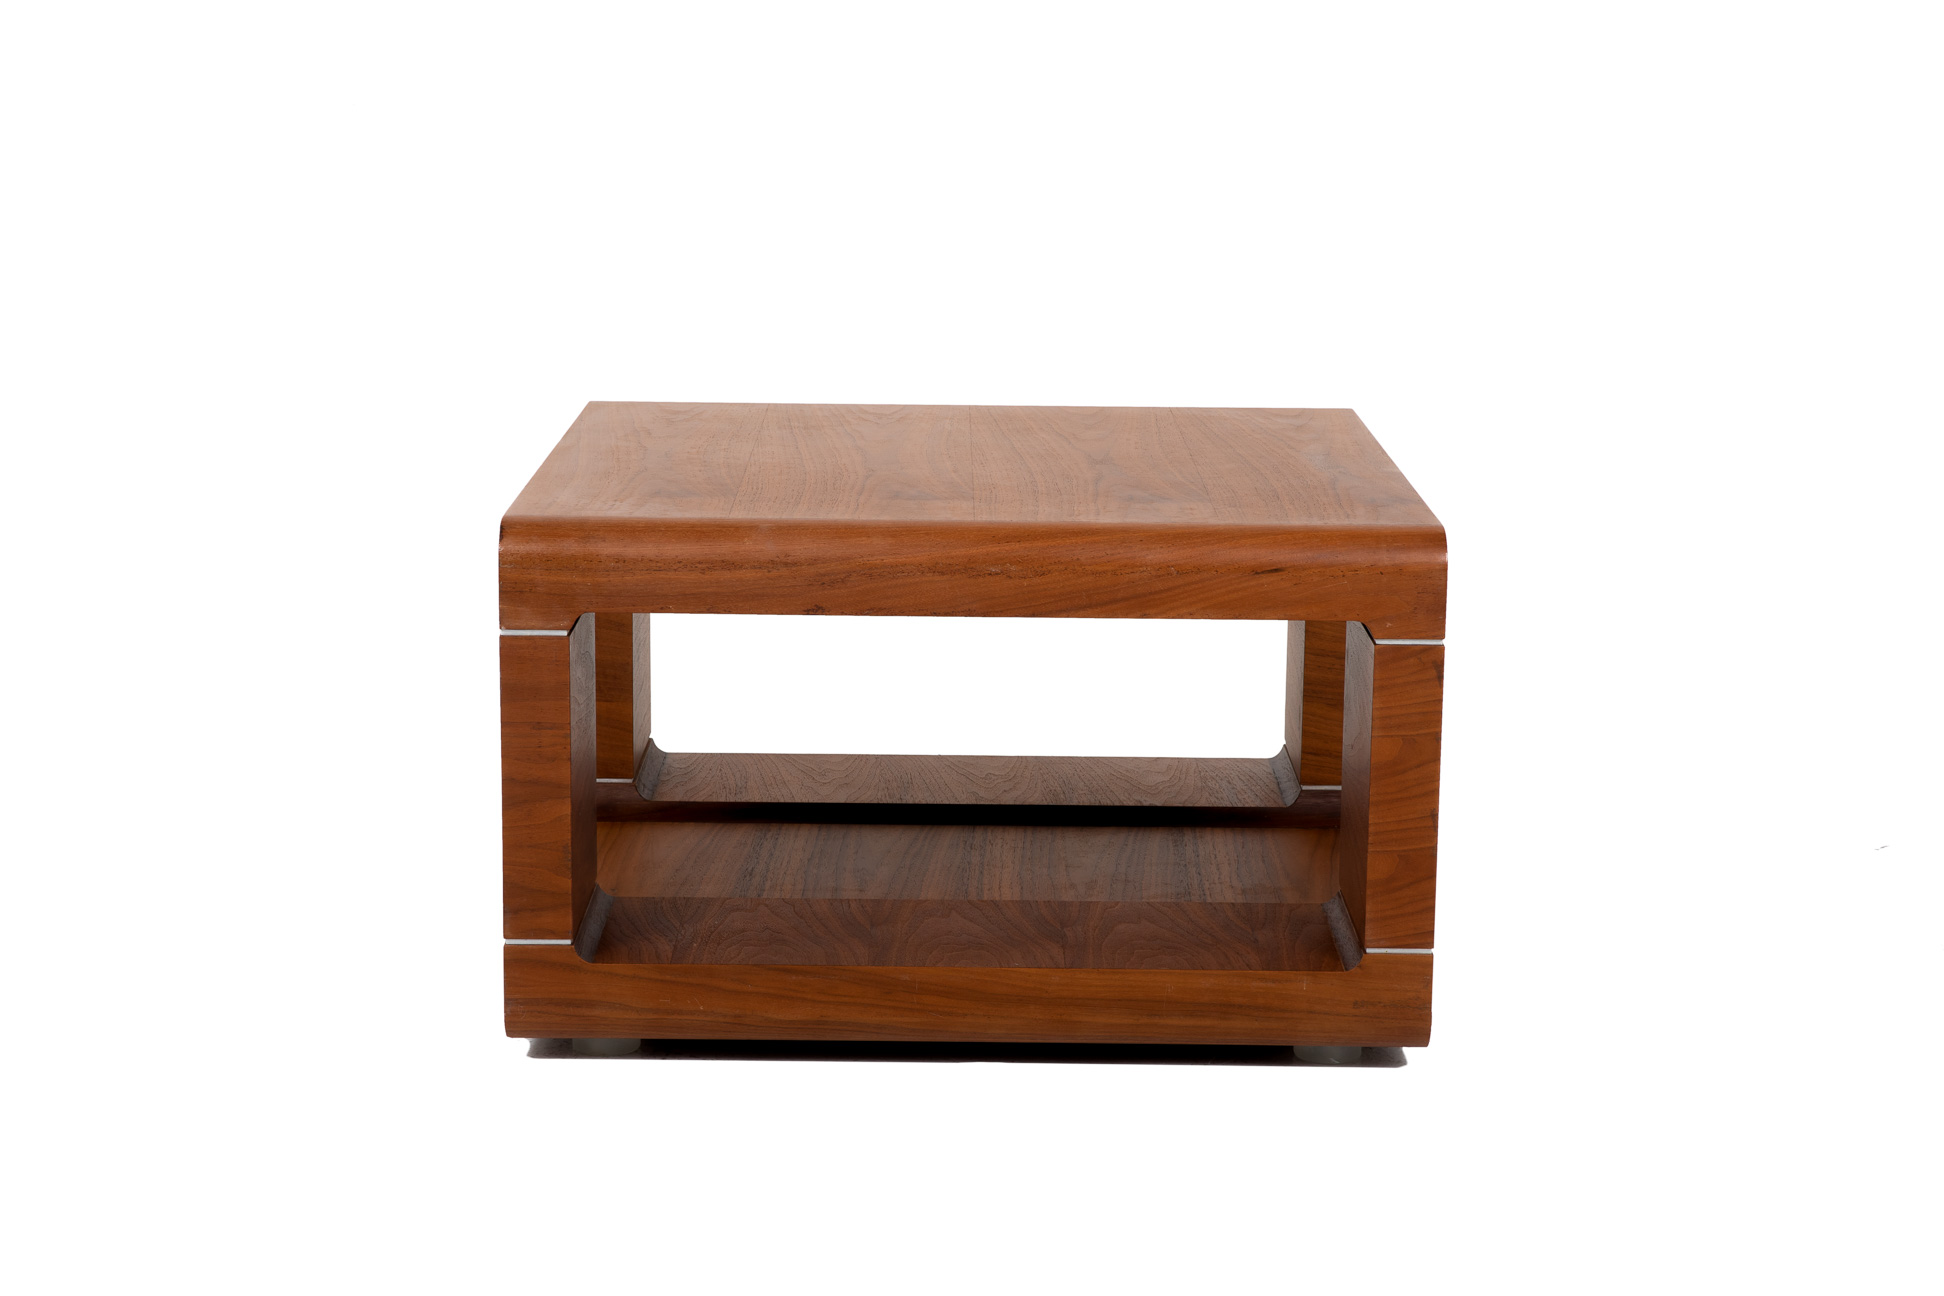 A CONTEMPORARY SQUARE COFFEE TABLE - Image 2 of 2